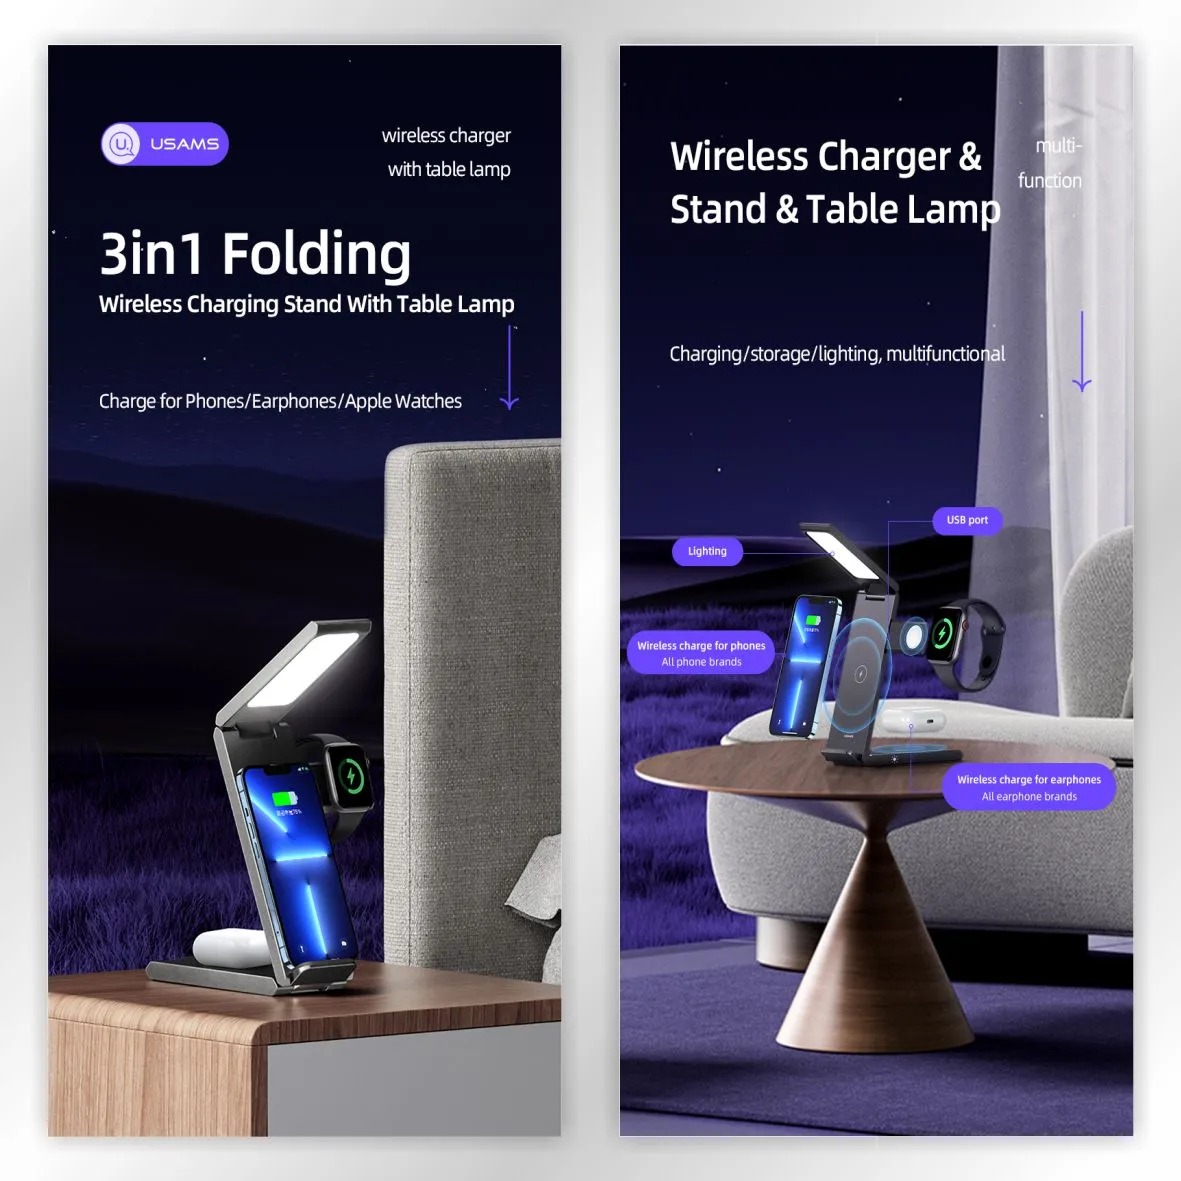 USAMS US-CD181 15W 3 in 1 Folding Wireless Charging Stand With Table Lamp